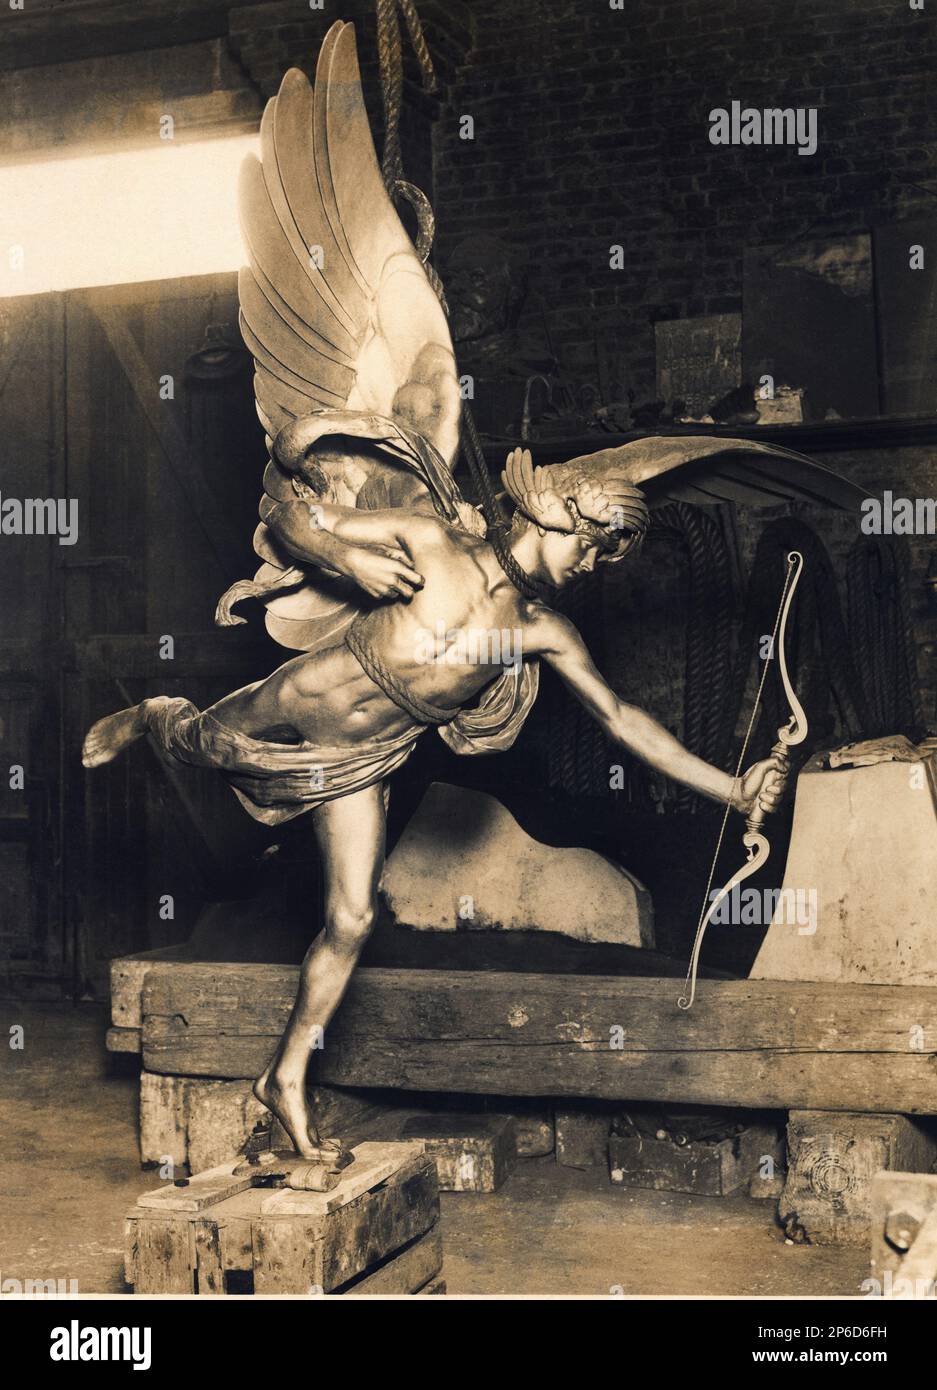 1931 , september , London , GREAT BRITAIN : The celebrate EROS statue on PICADILLY CIRCUS fountain , artwork by gay victorian sculptor ALFRED GILBERT ( 1854 - 1934 ) , left the foundry at Thames Ditton after a restoration and return to take up it's old position . In February 1925, when the removal of the monument for the construction of the new tube station threatened their livelihood . After the removal of the memorial, Eros was erected in the Embankment Gardens on a concrete stand, while the base was stored at No. 195 Clapham Road.  Although the monument was not replaced for nearly seven yea Stock Photo